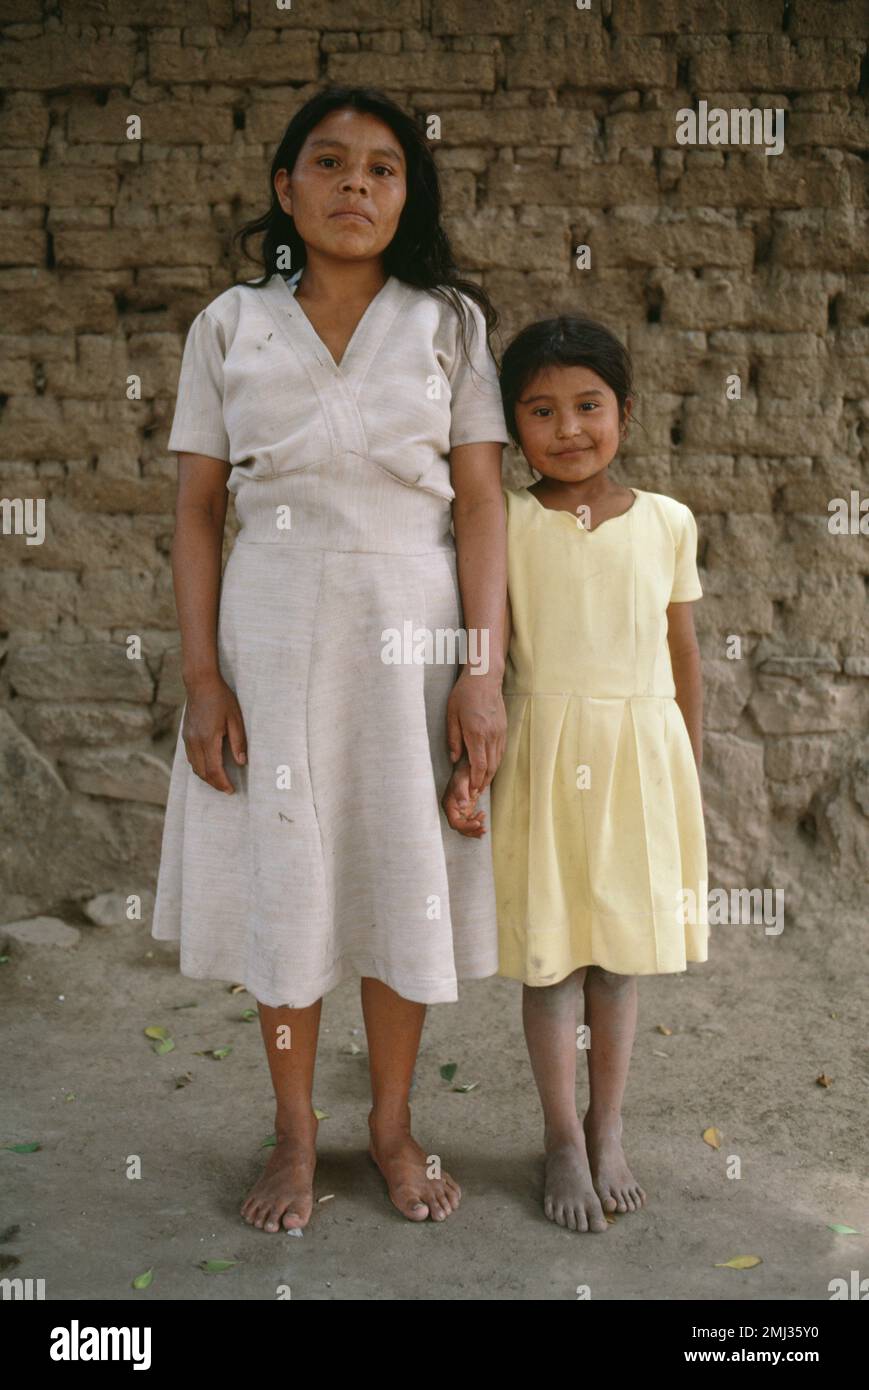 A Mazatecan mother and daughter outside their home near the city of Oaxaca, Oaxaca, Mexico Stock Photo